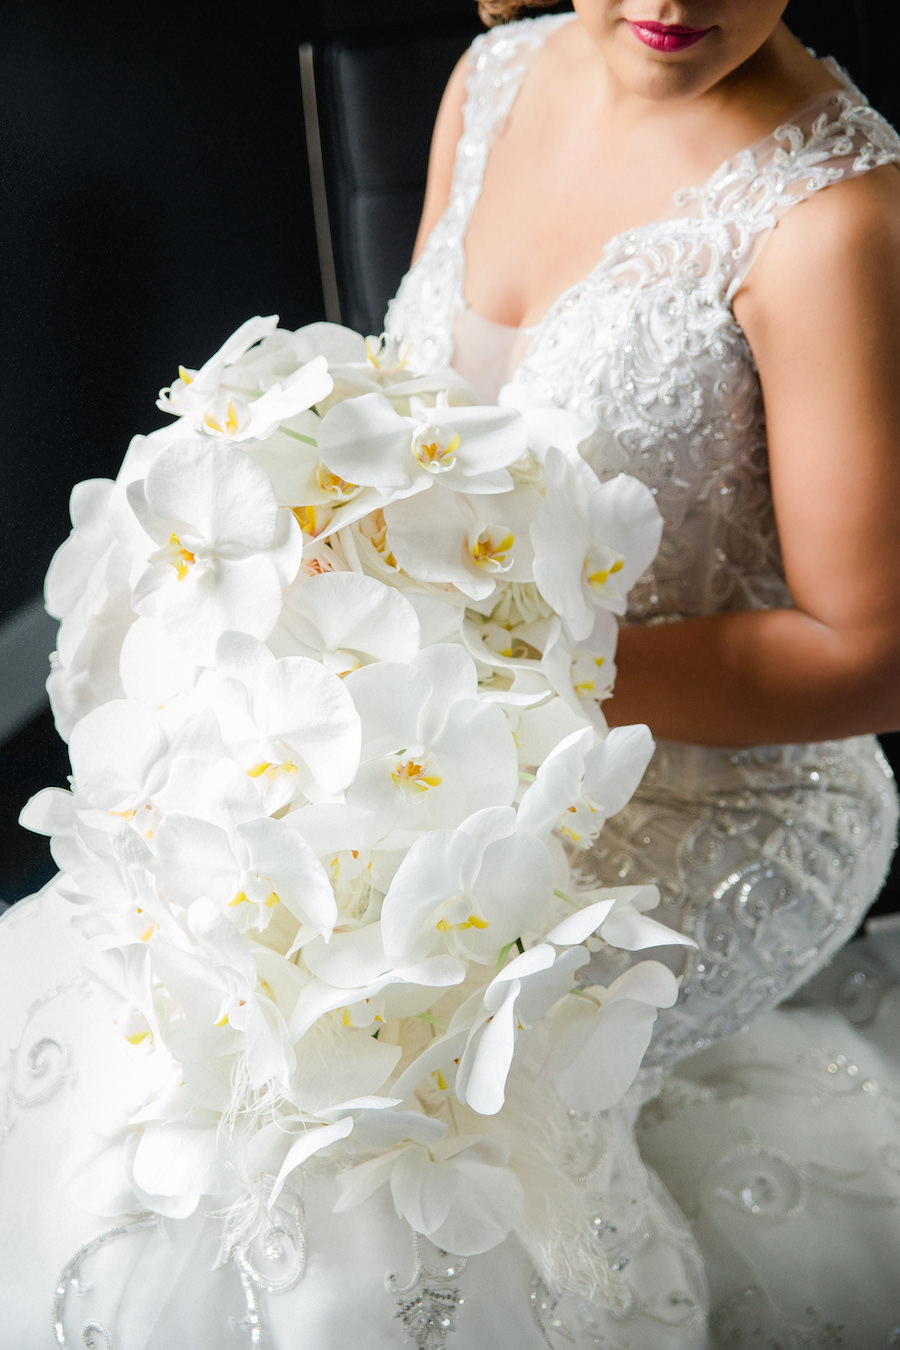 Liana Fuente Bridal Wedding Portrait in Beaded Ines DiSanto Wedding Dress with Cascading White Orchid Bouquet | Tampa Wedding Photographer Ailyn La Torre Photography | Wedding Dress from Isabel O’Neil Bridal